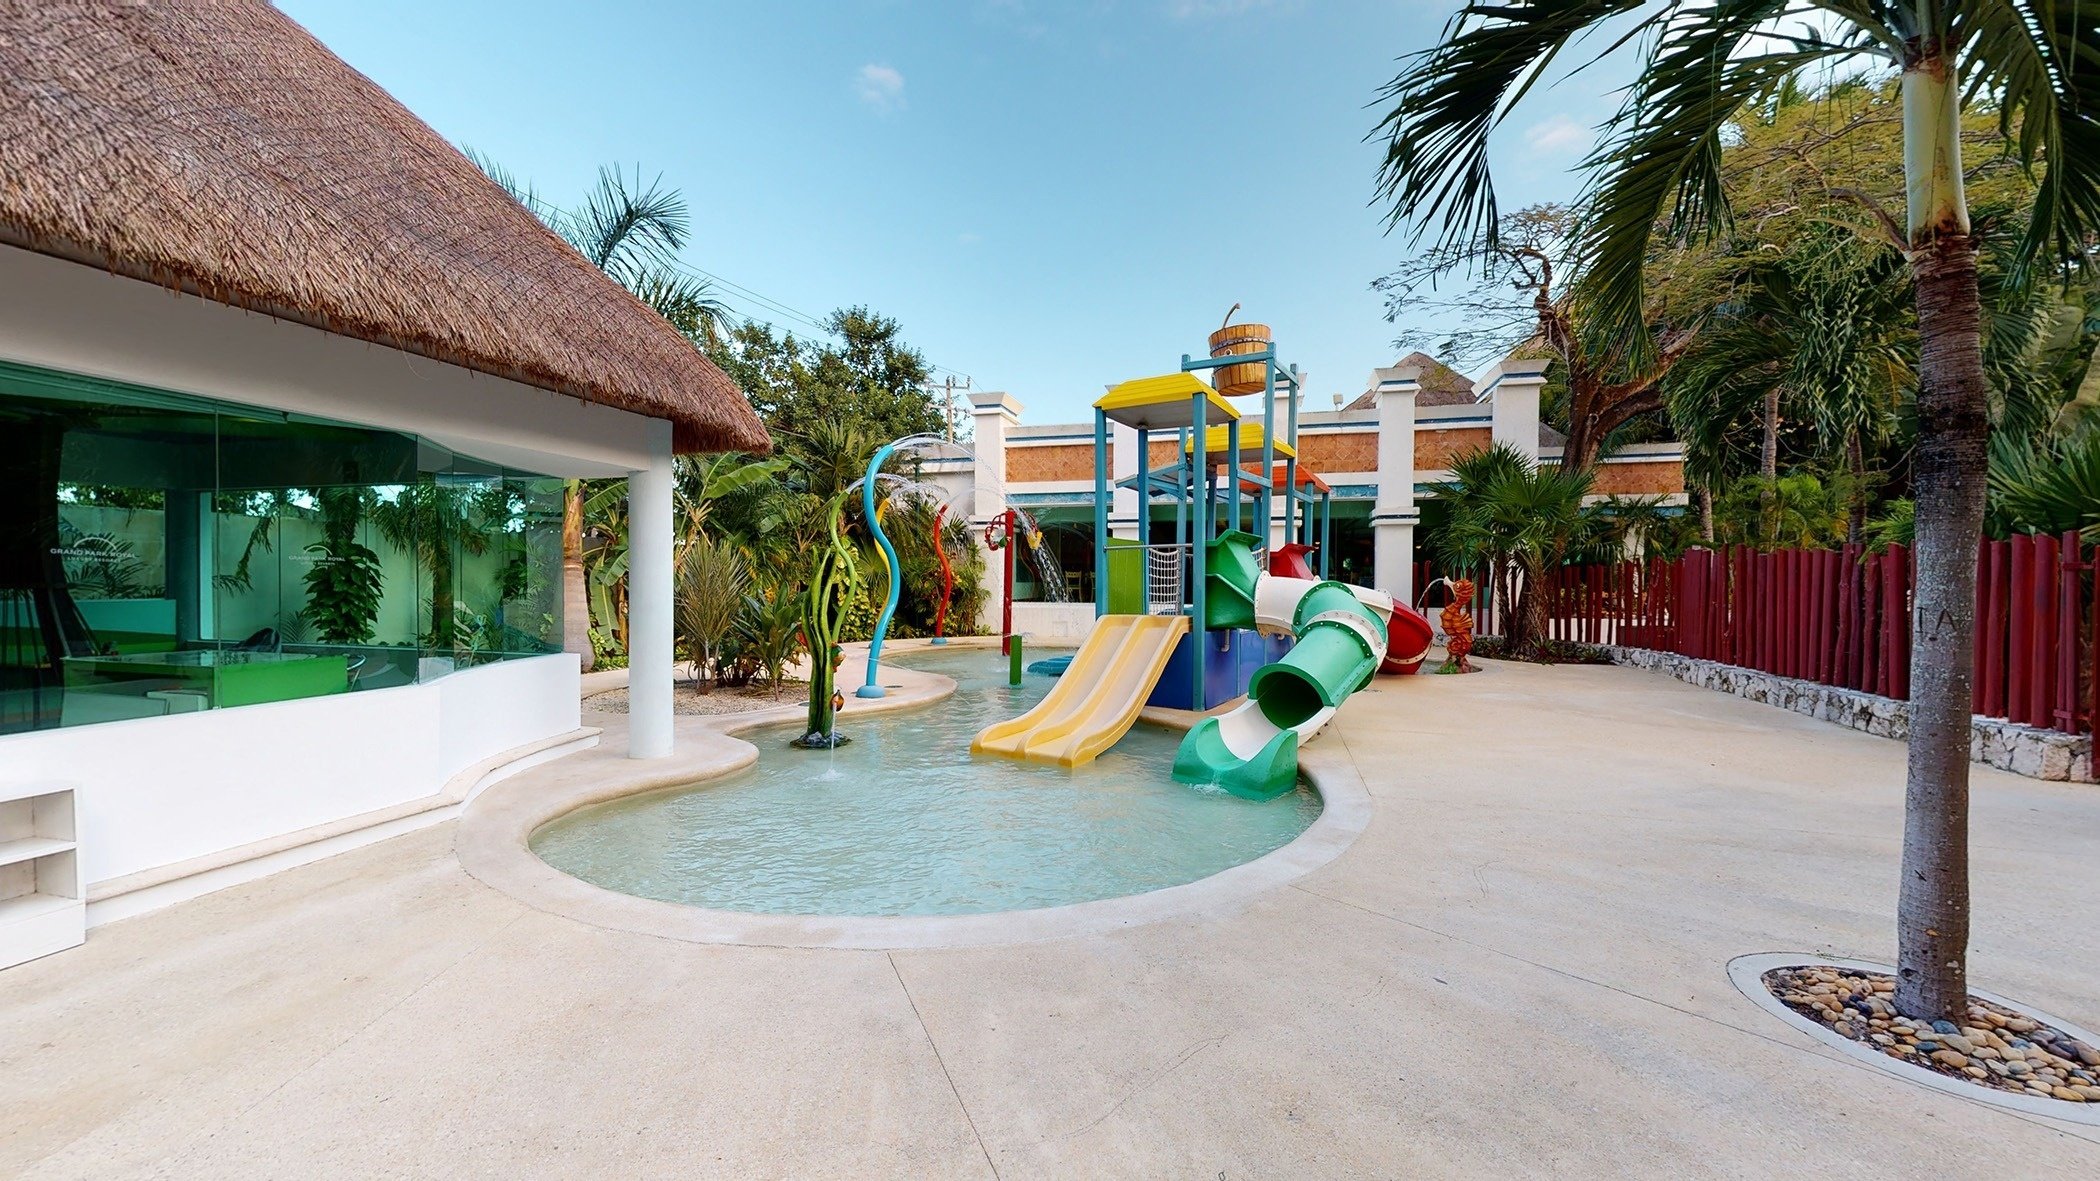 Overview of water park and facilities of Park Royal Grand Cozumel, Mexico